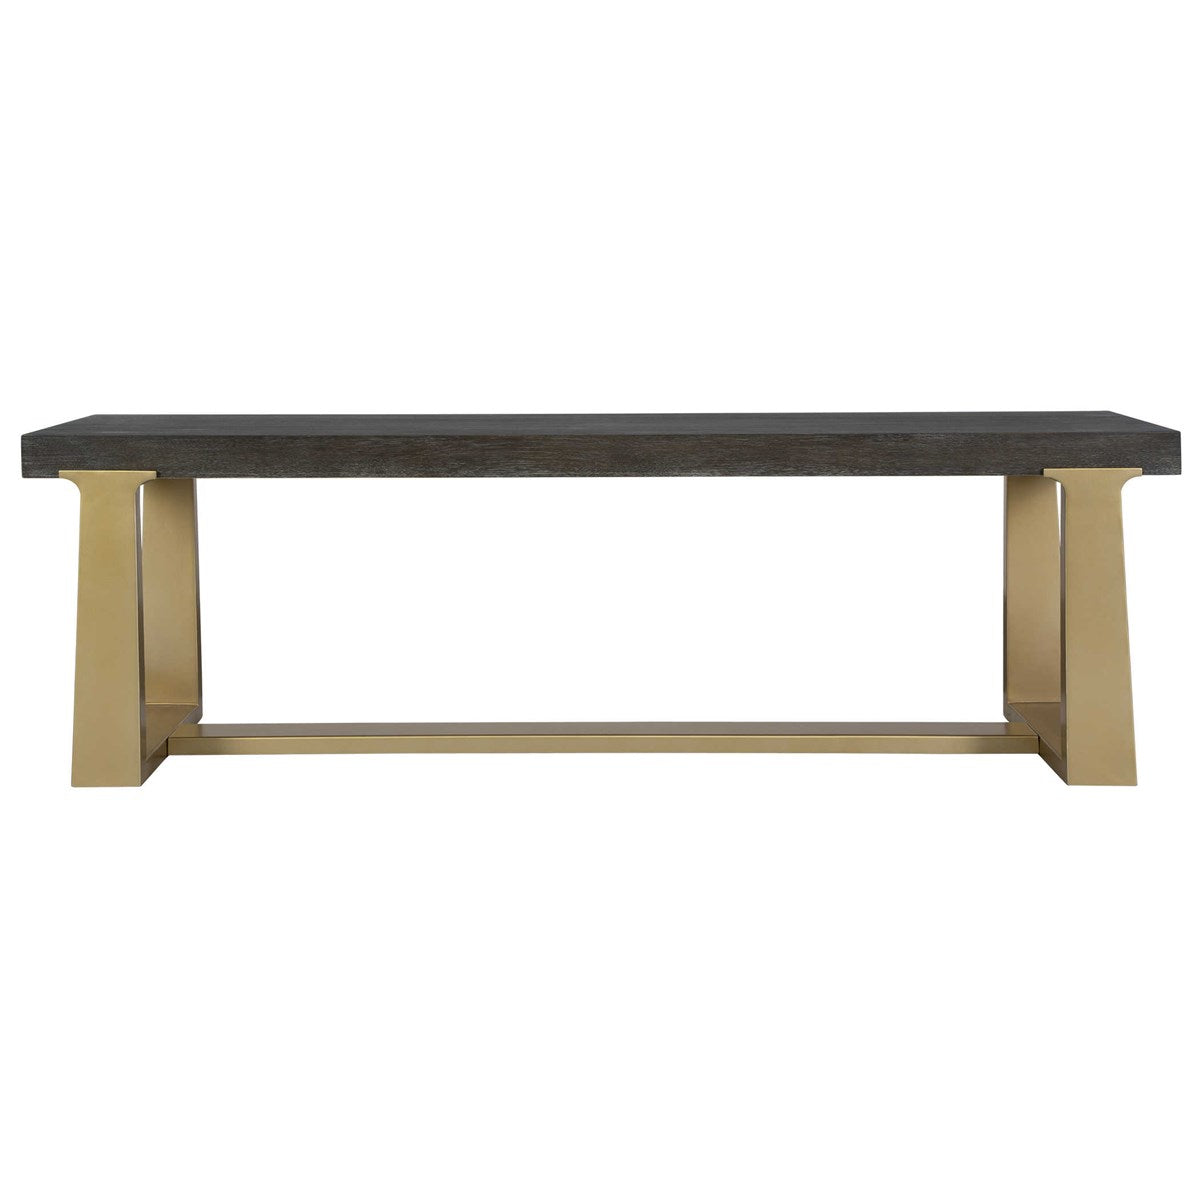 Uttermost Voyage Brass And Wood Bench-Uttermost-UTTM-22989-Benches-2-France and Son